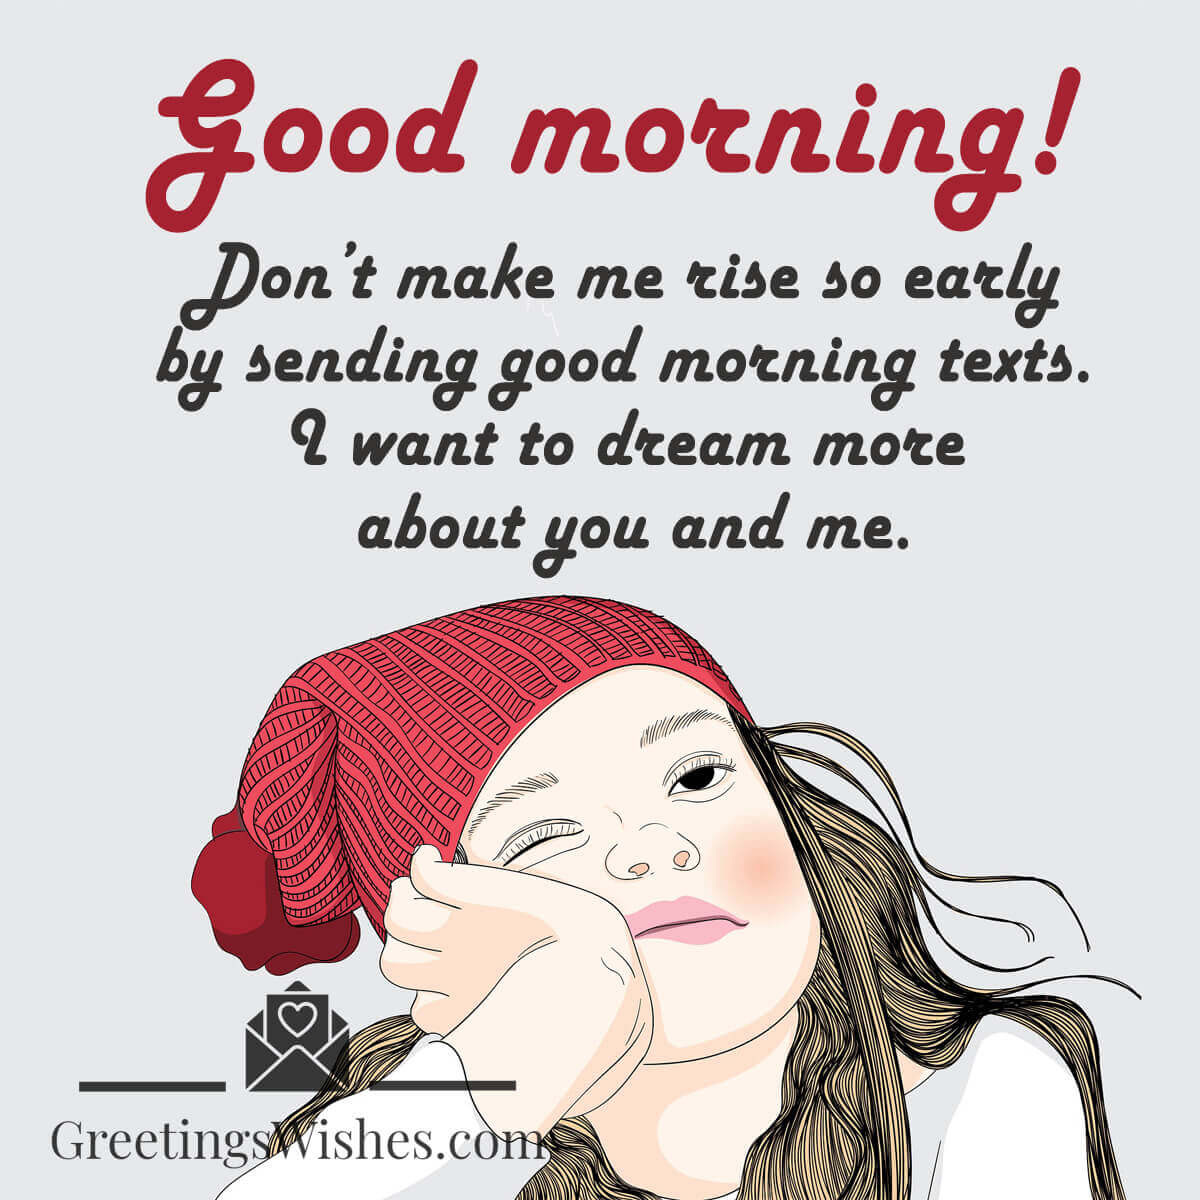 Funny Good Morning Wishes - Greetings Wishes